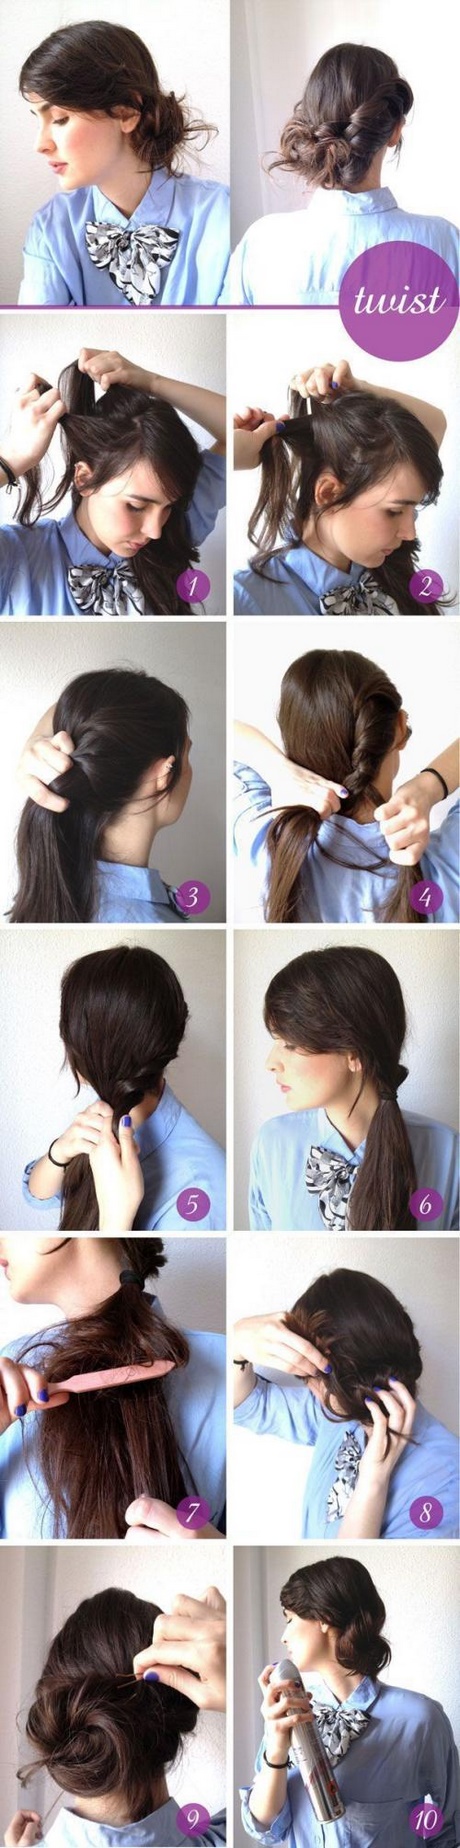 Simple hairstyles to do at home simple-hairstyles-to-do-at-home-98_19